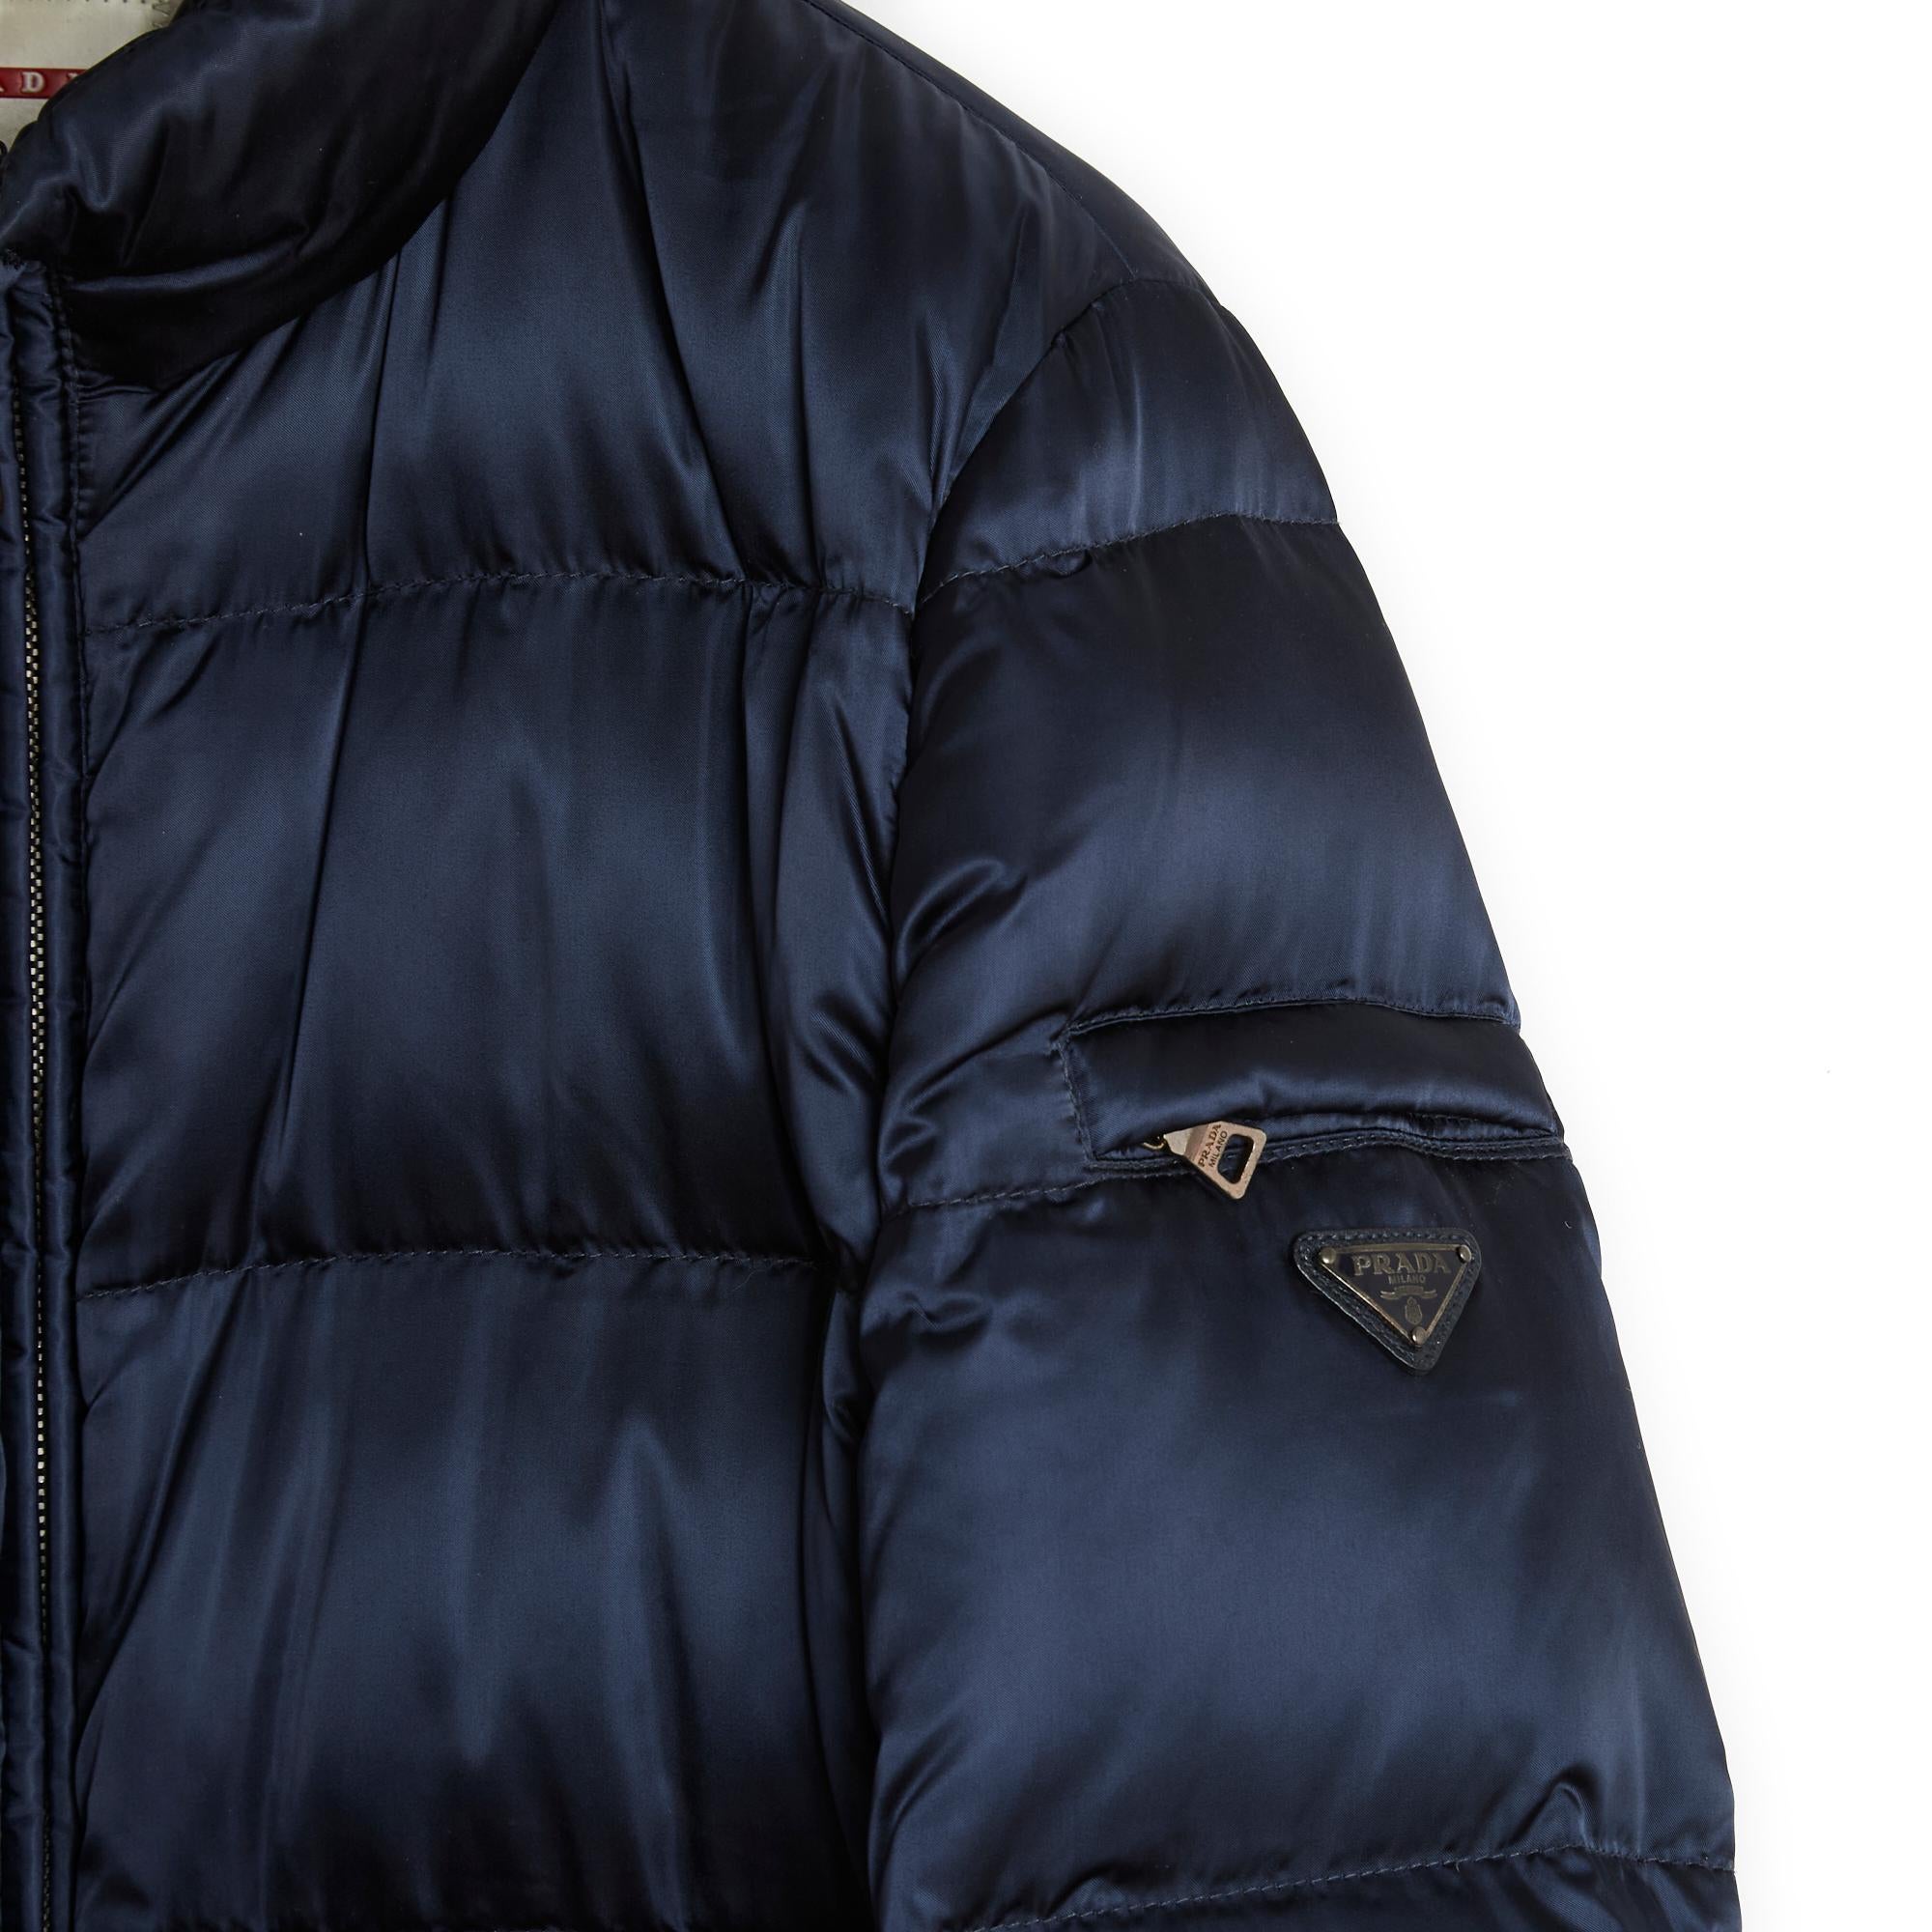 Prada coat, Re-Nylon style down jacket in navy blue satin polyamide and down, quilted, high collar closed all the way up with a long double-slider zip, long sleeves, one of which has a small zipped pocket and Prada logo, elastic at the wrist,